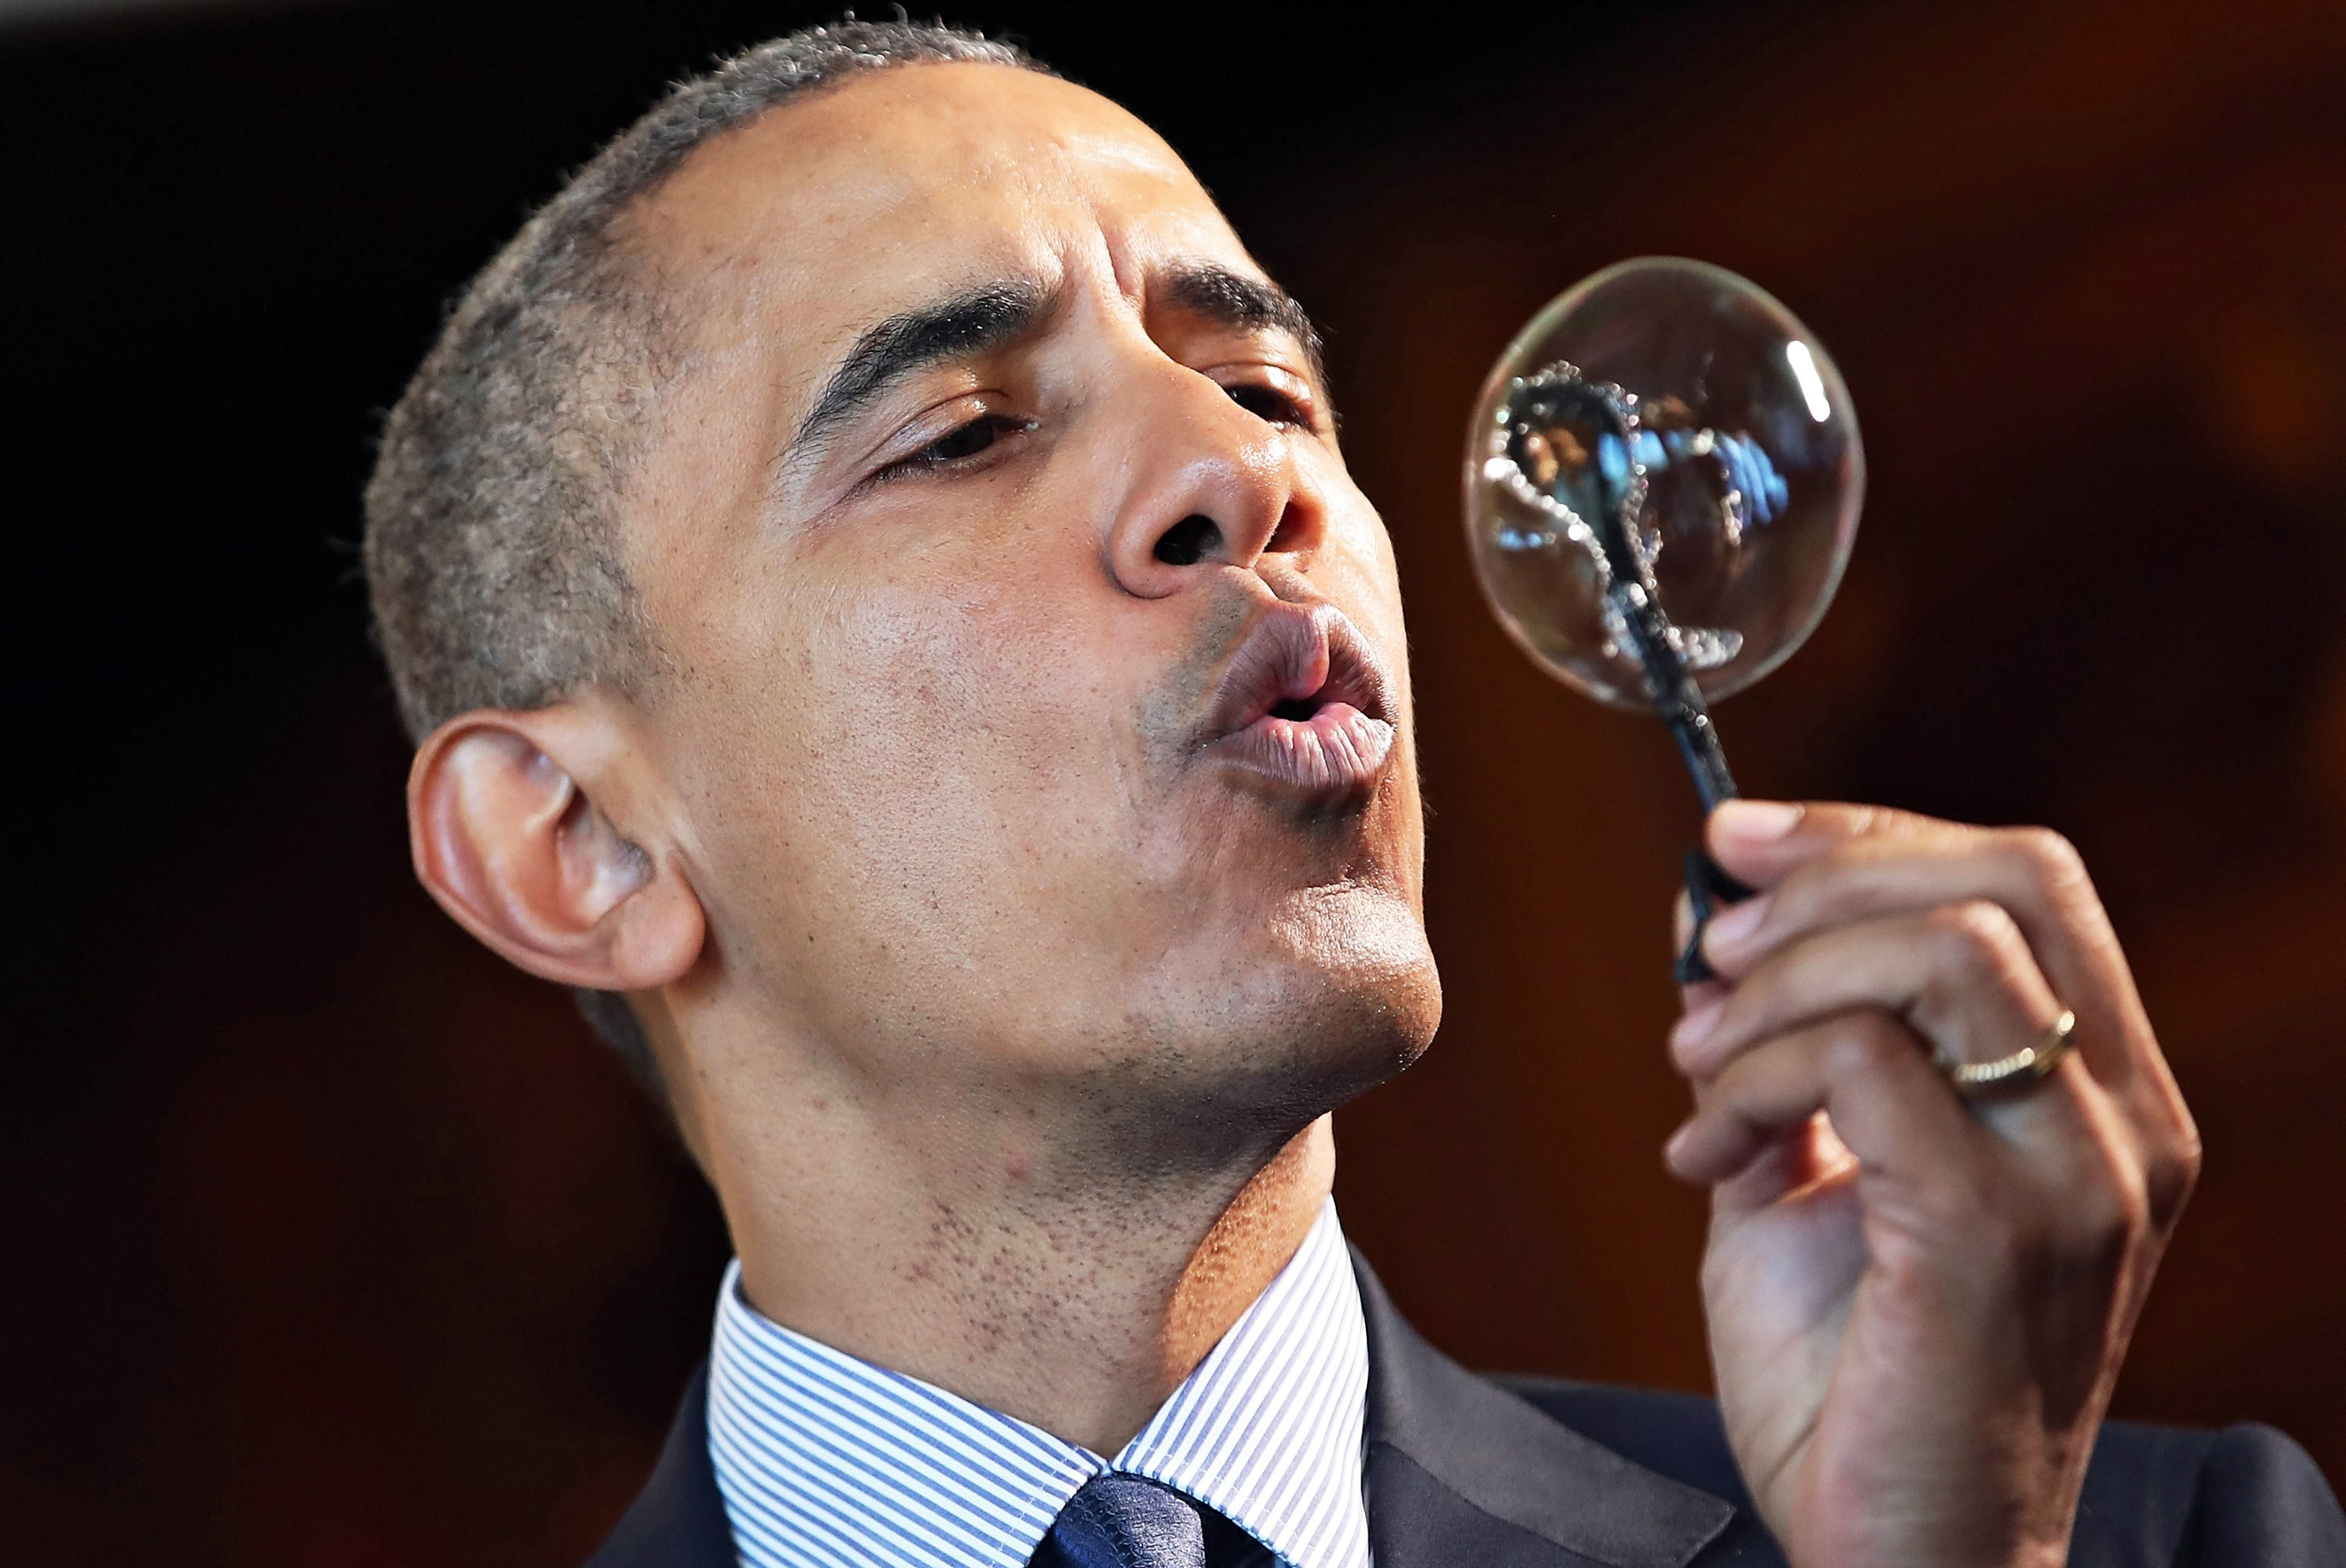 President Barack Obama blows a bubble from a wand made with a 3D printer by nine-year-old Jacob Leggette at the White House Science Fair in Washington on April 13, 2016.